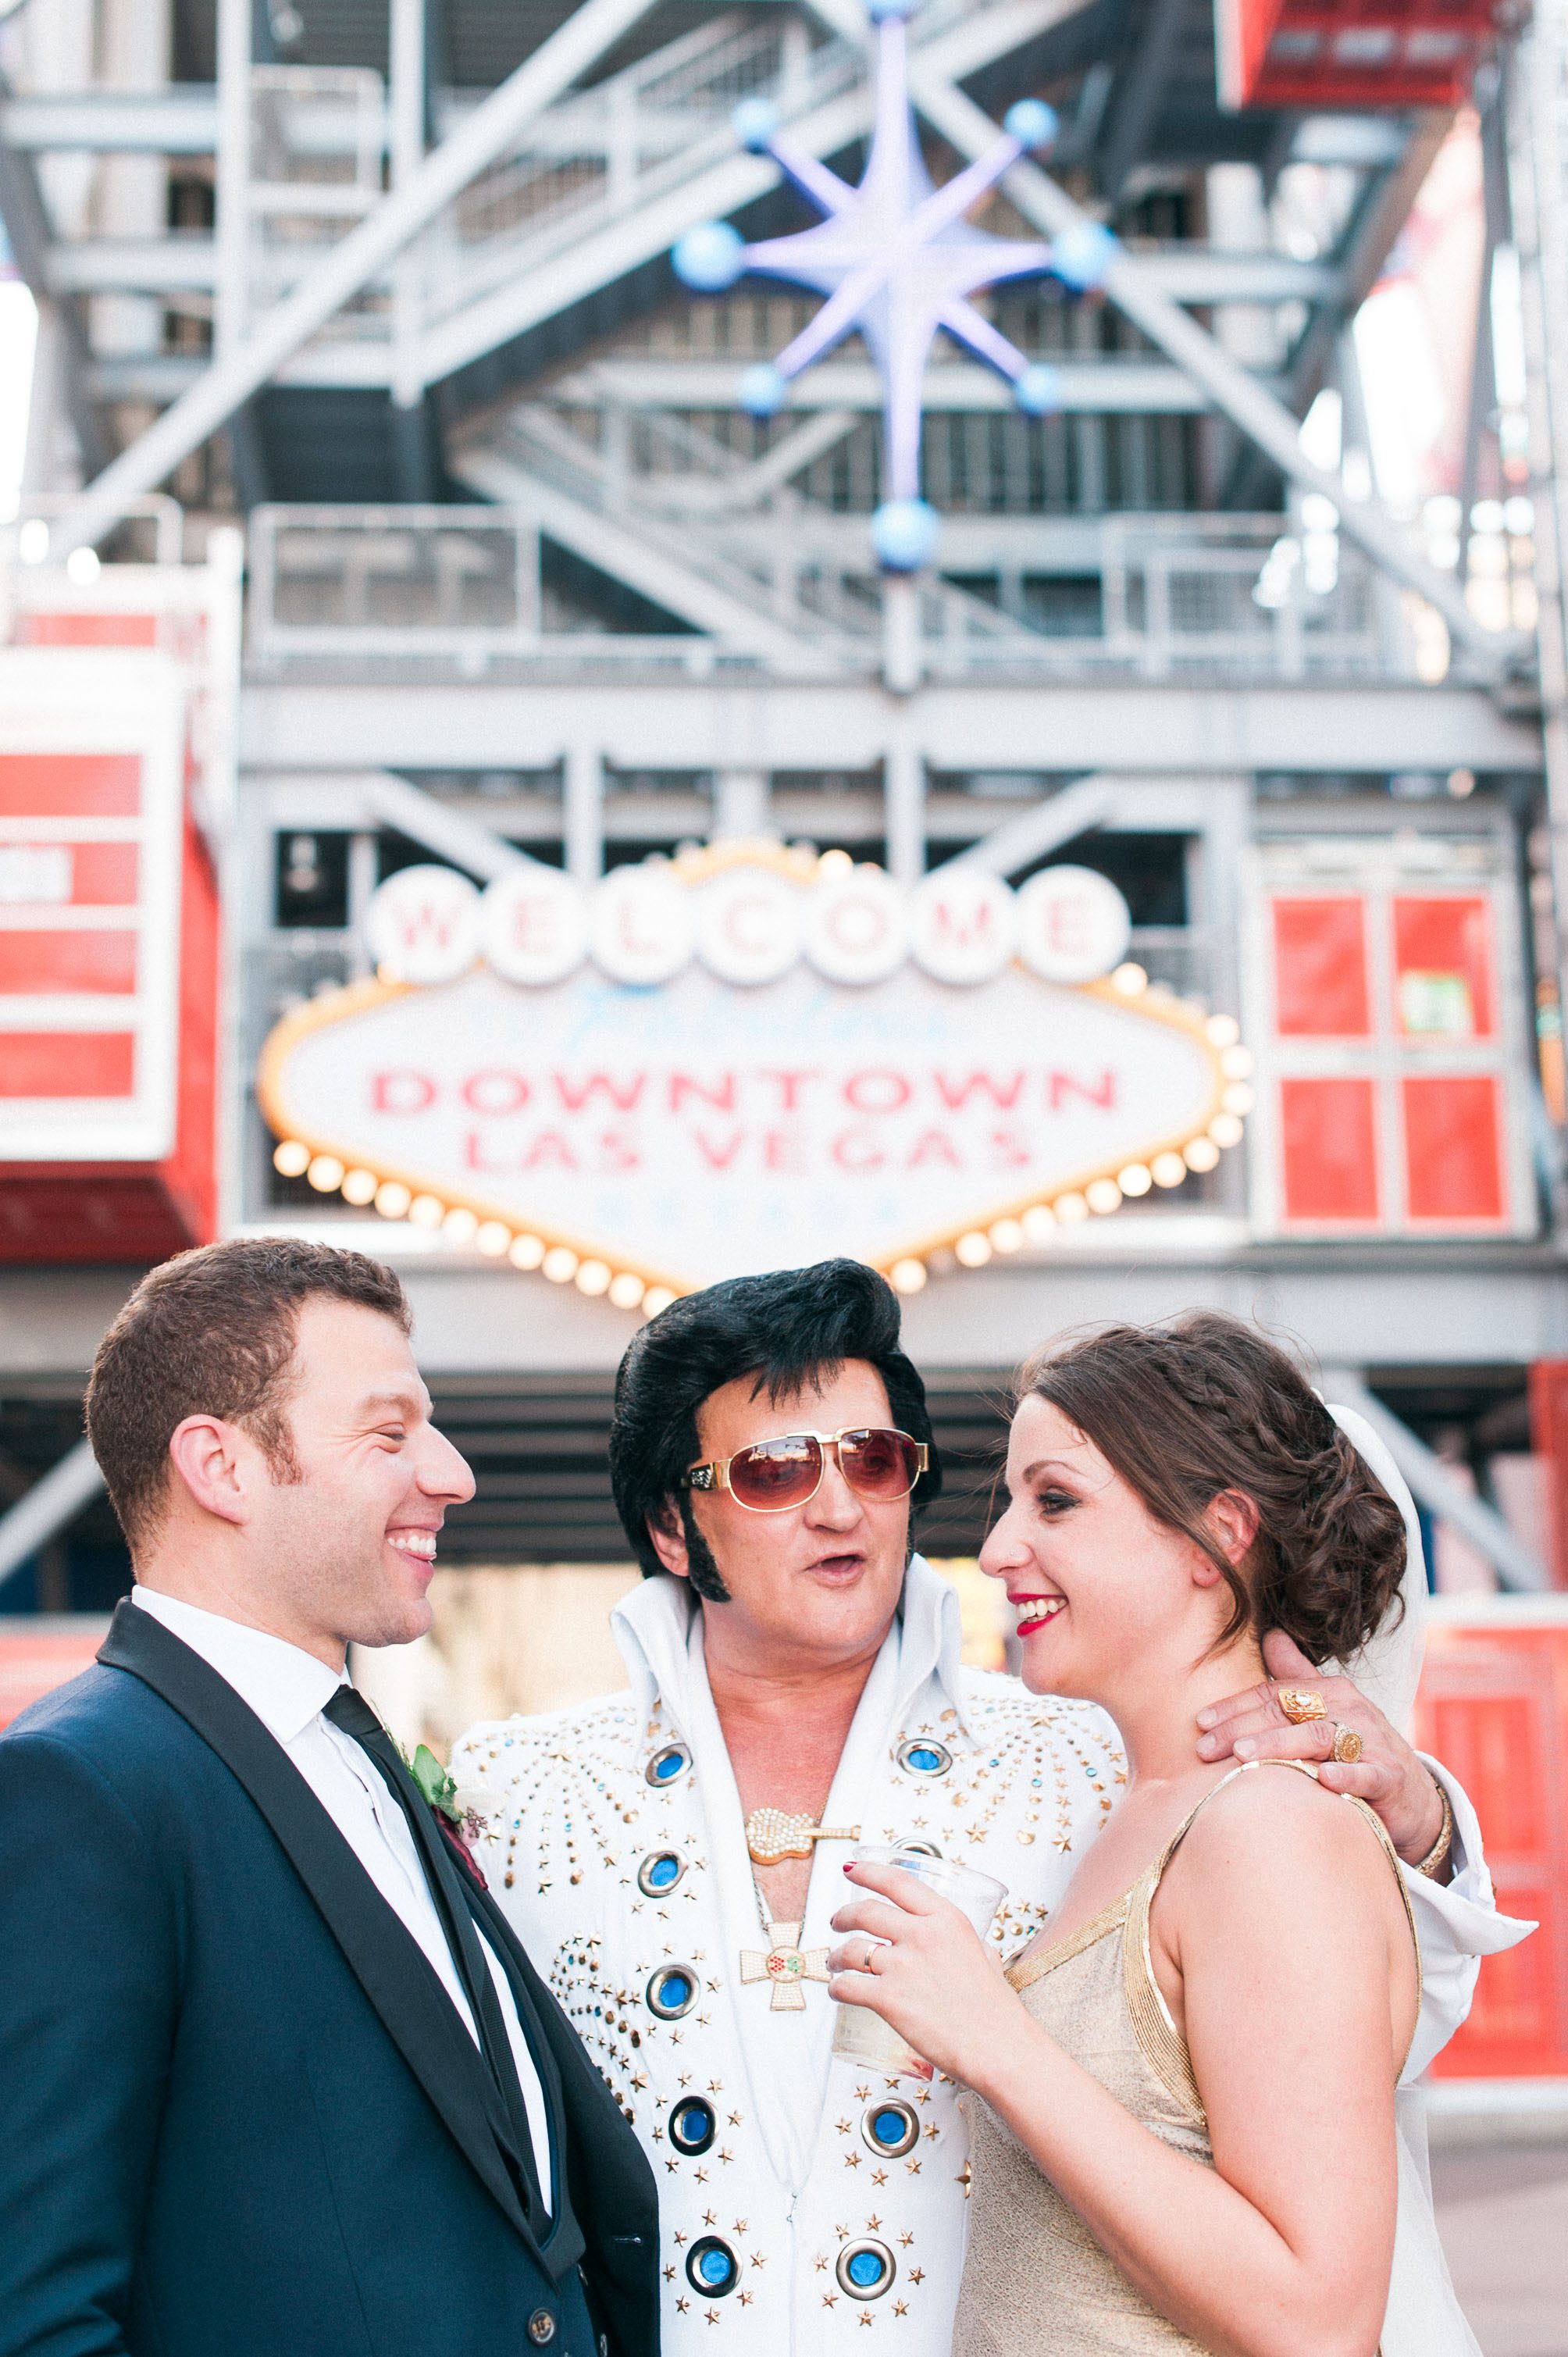 Elvis gives his blessing to a bride and groom in Las Vegas, Nevada. Captured by Las Vegas Elopement Photographer Briana Morrison